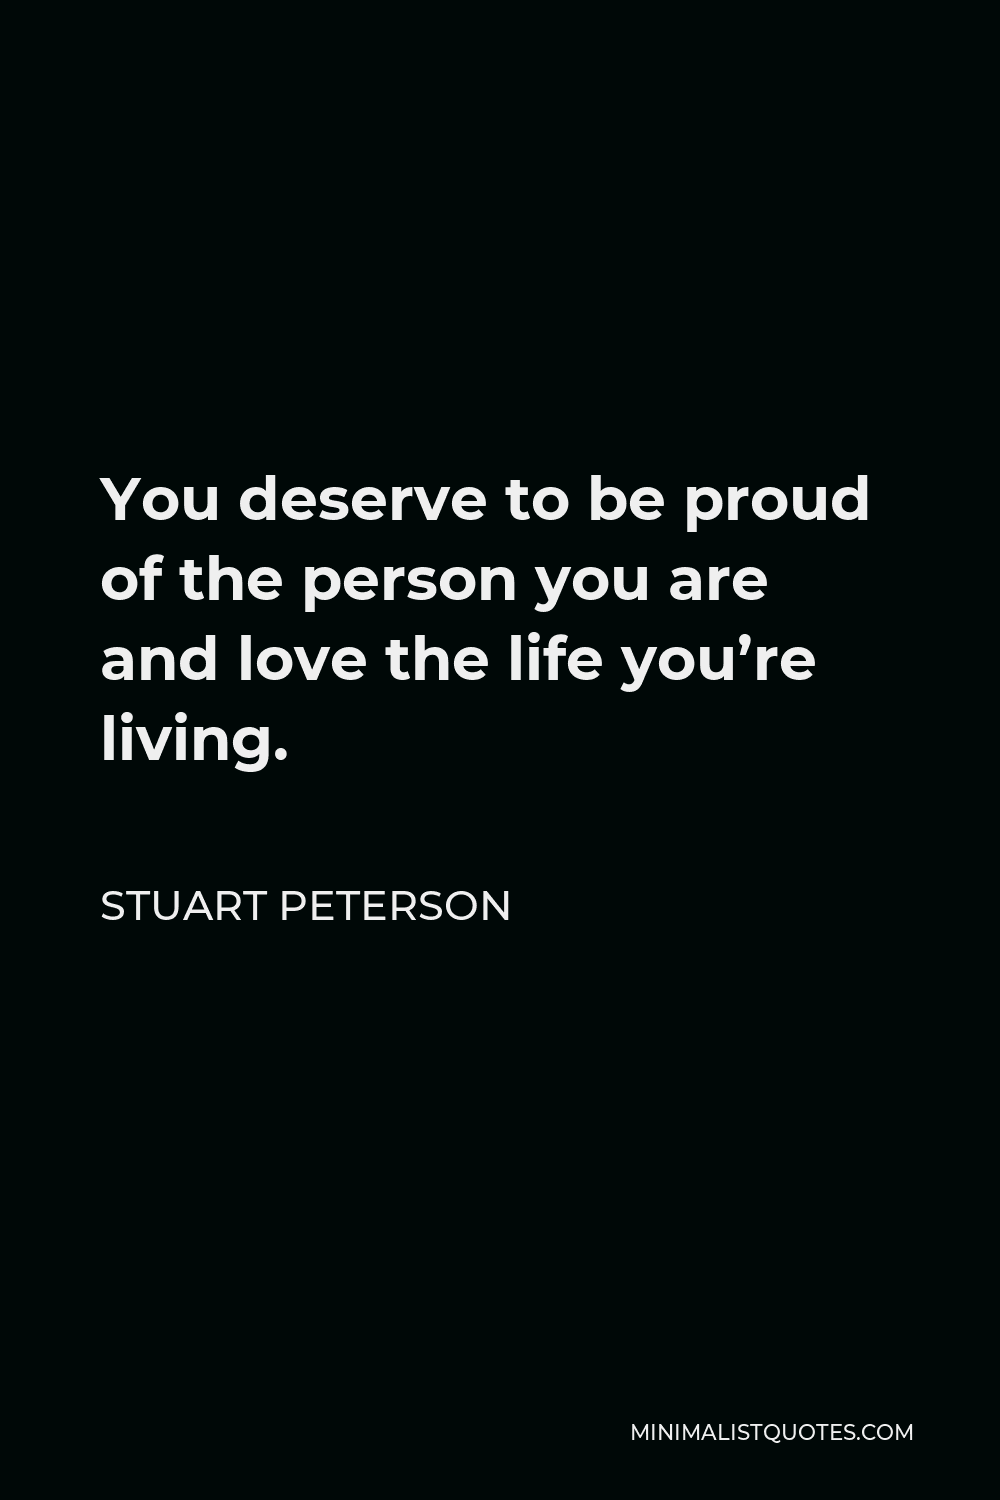 Stuart Peterson Quote - You deserve to be proud of the person you are and love the life you’re living.